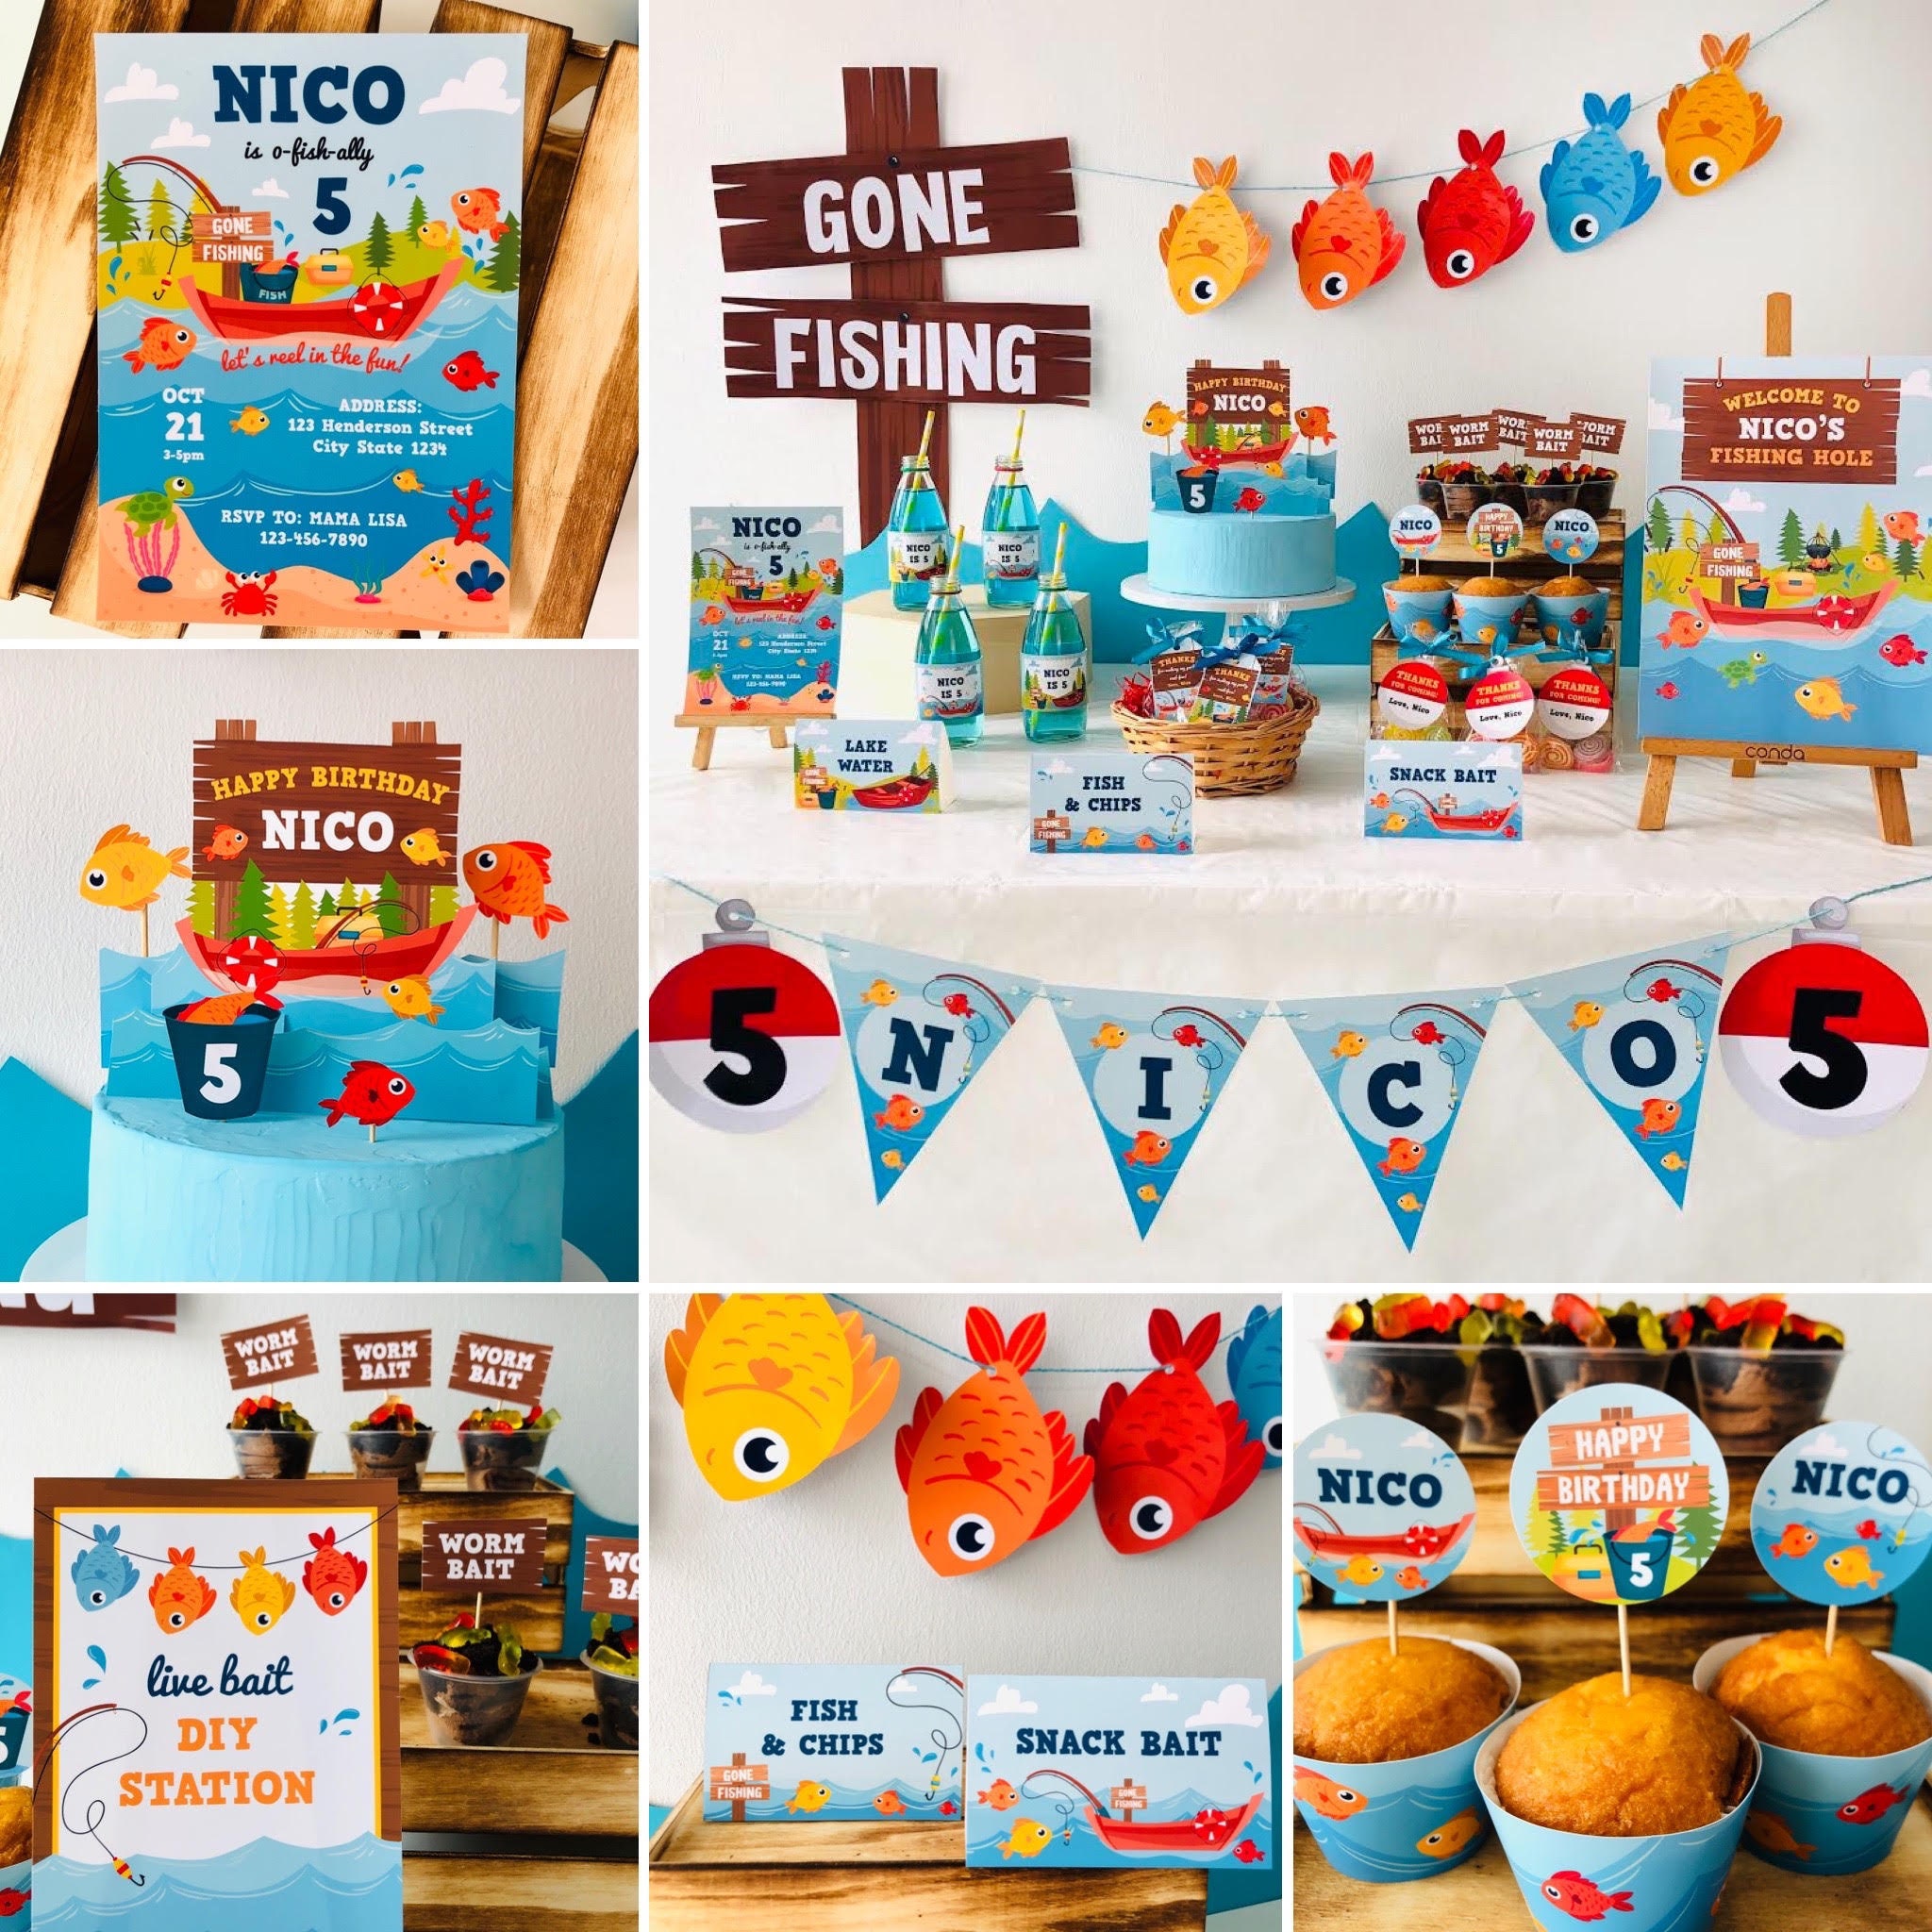 10+ Fishing Birthday Party Ideas for a Gone Fishin' Themed Event